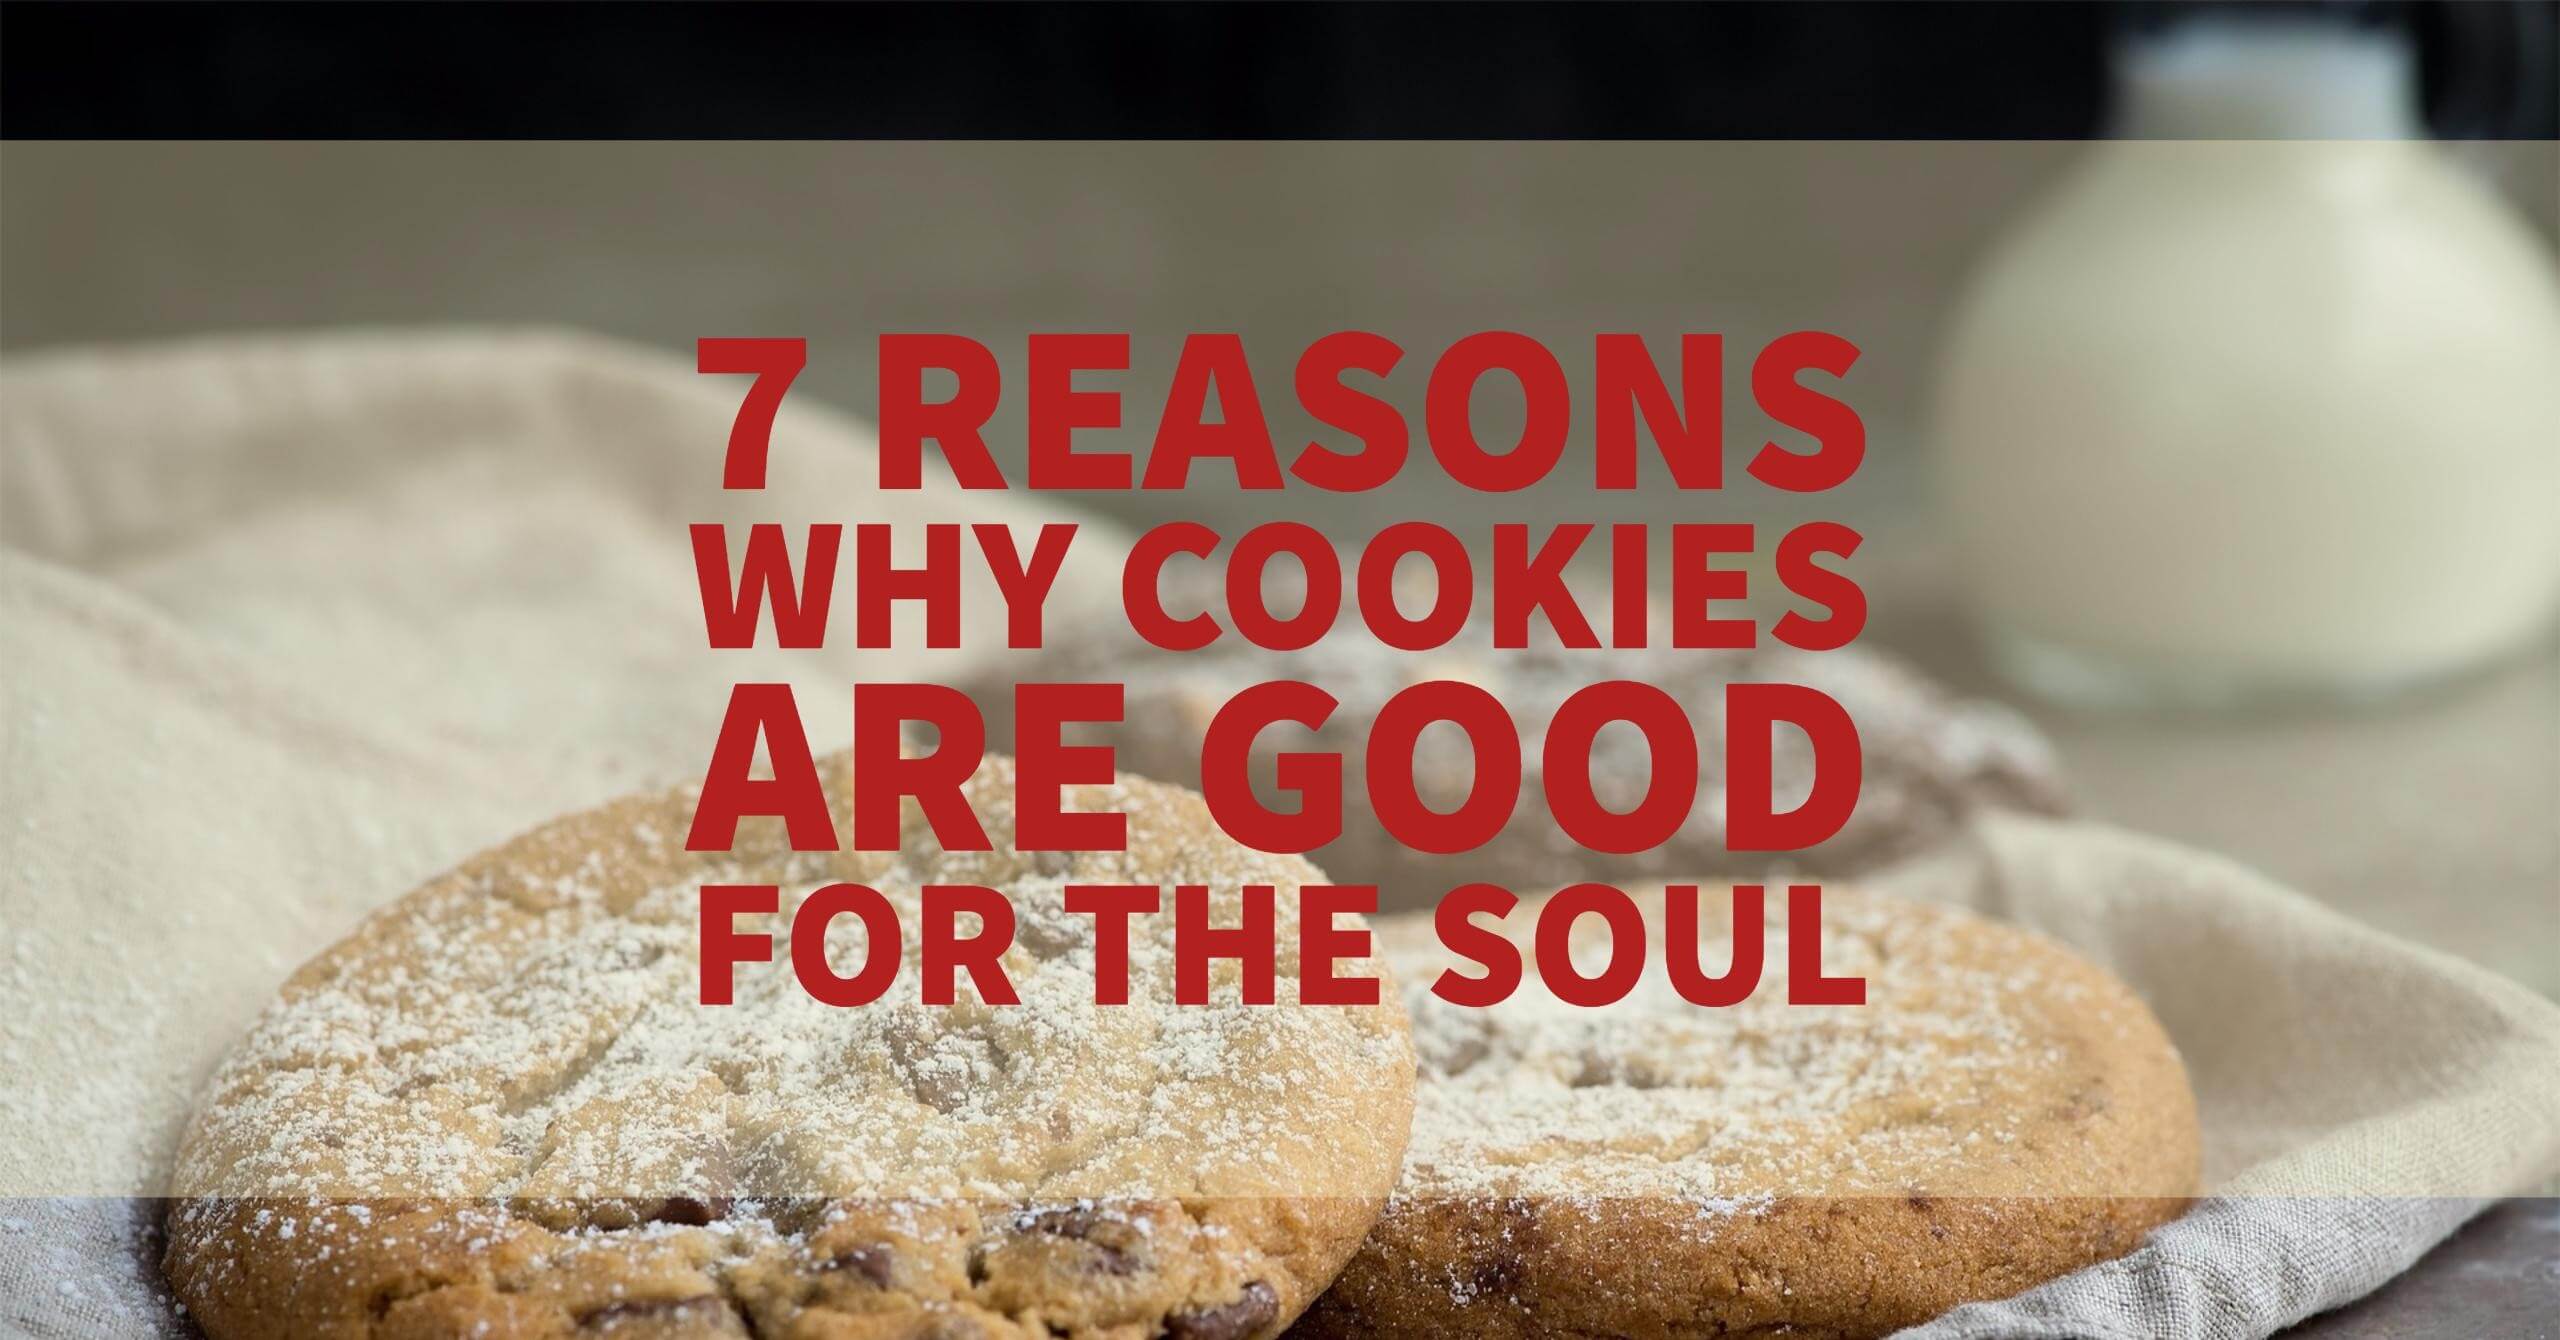 7 Reasons Why Cookies are Good for the Soul